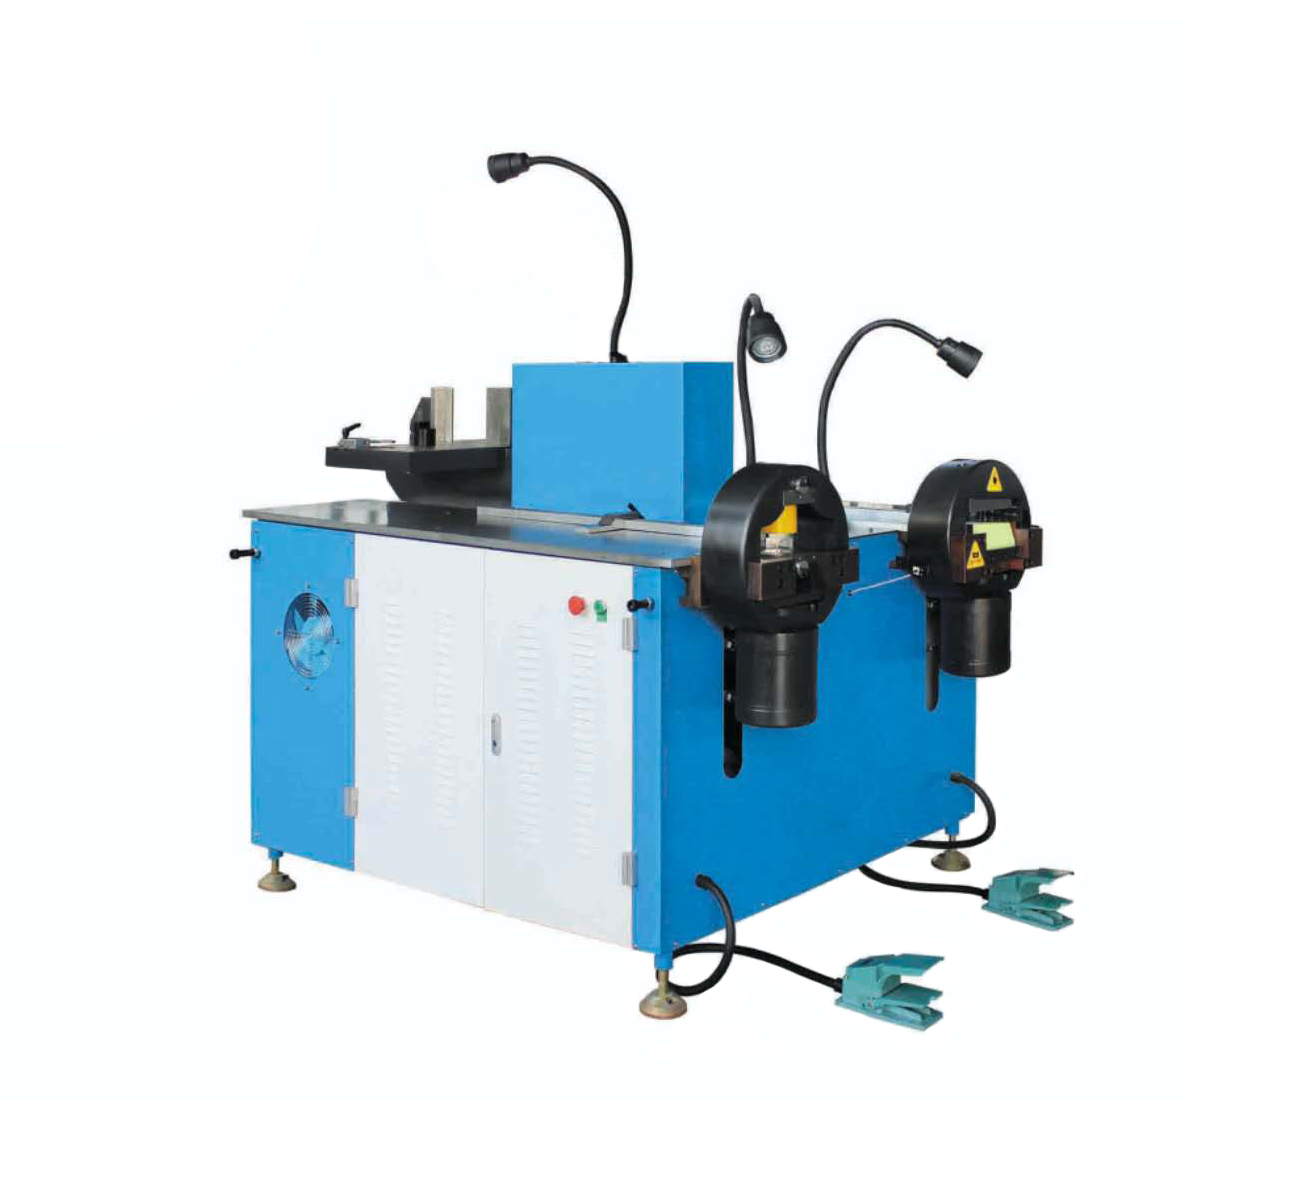 China Wholesale Used Bar Bending Machine Manufacturers - Good Quality China Factory Sale Various Multi-Function Machine Press Briqueting Hydraulic Scrap Metal Used Car Baler for Sale  – Gaoji